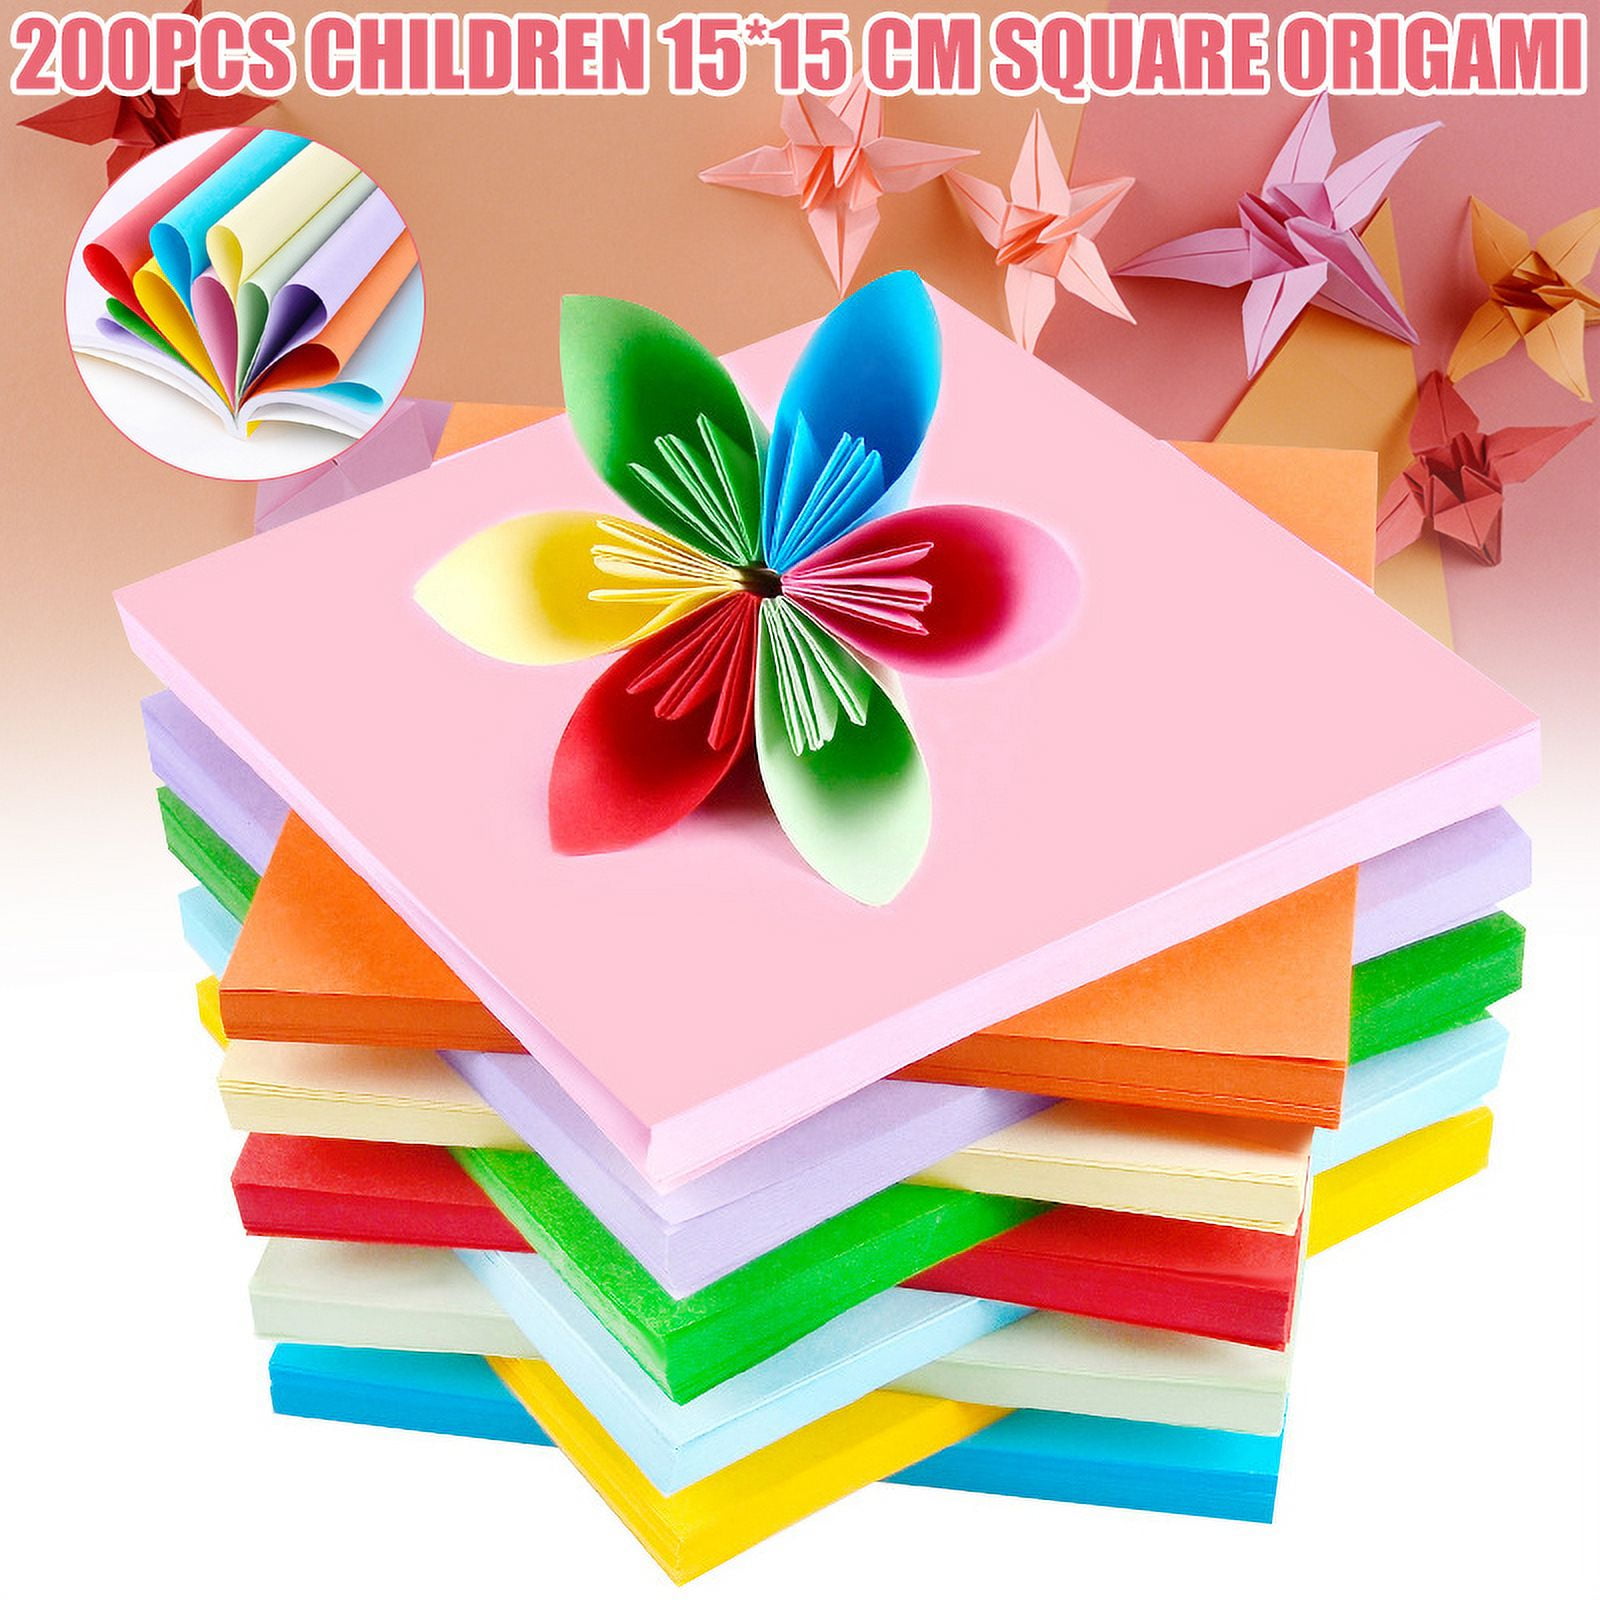 90Pcs Double Sided Colorful Origami Paper and 30 Origami Projects  Instruction Booklet for DIY Arts & Crafts Kids and adults Gift